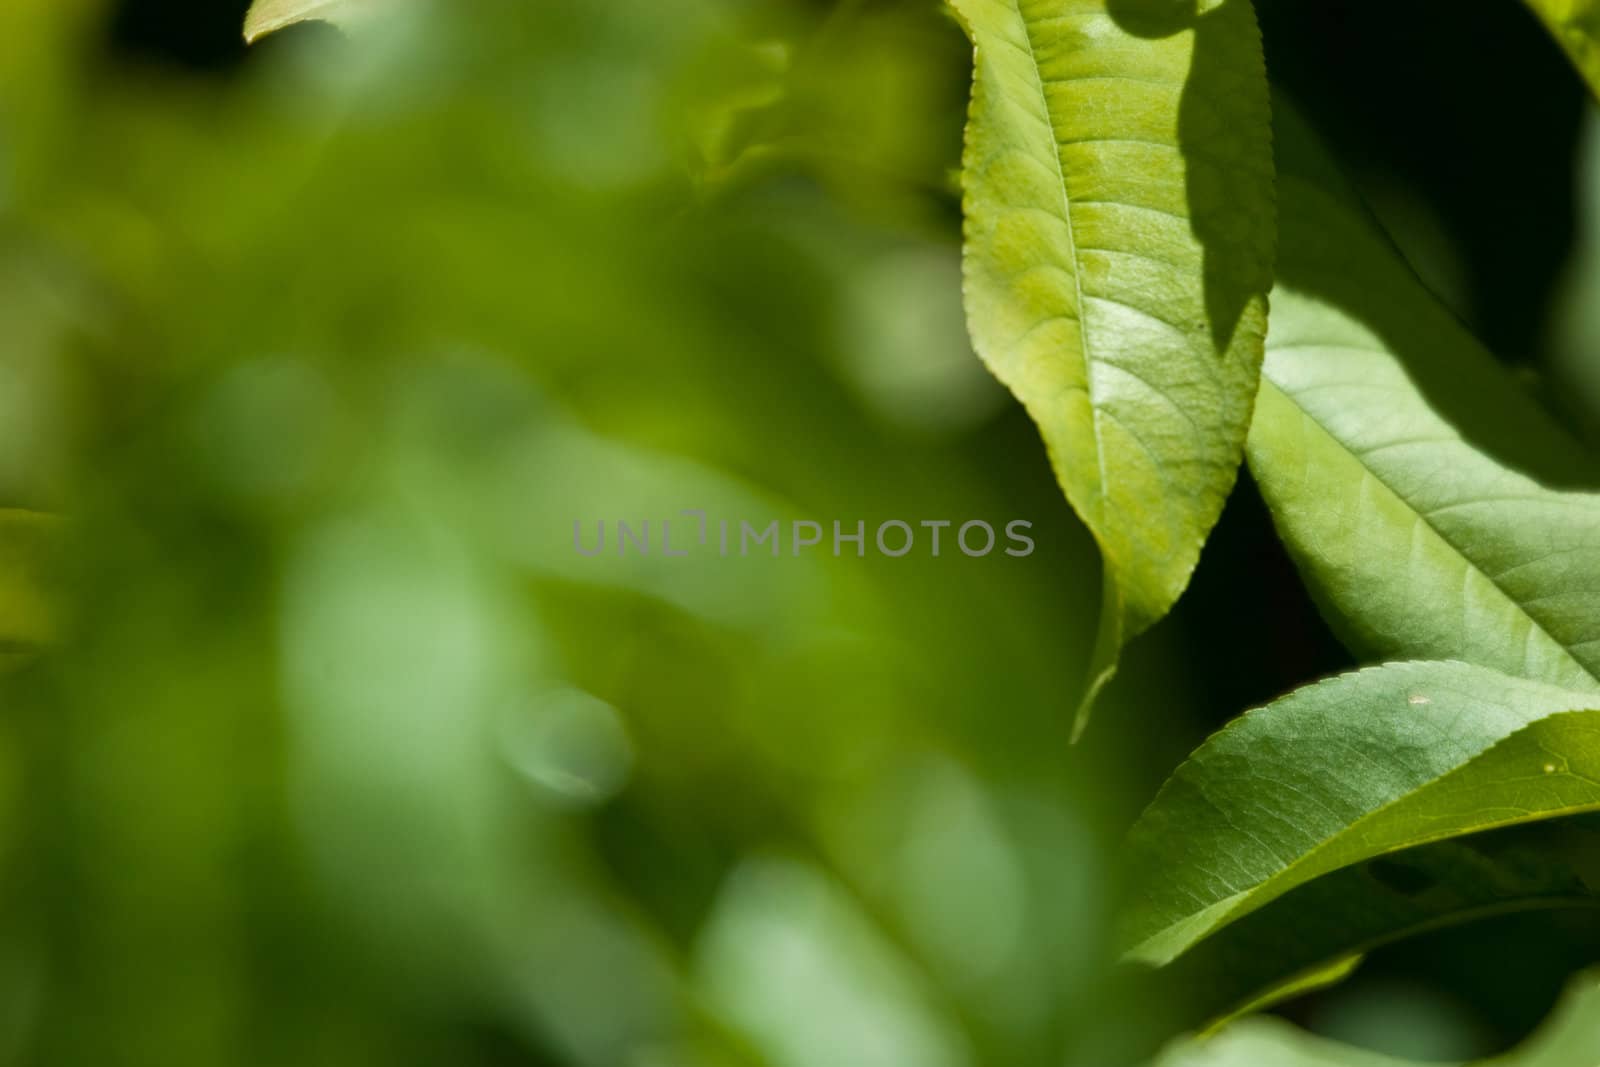 Close-up of leaves with a blurred background.